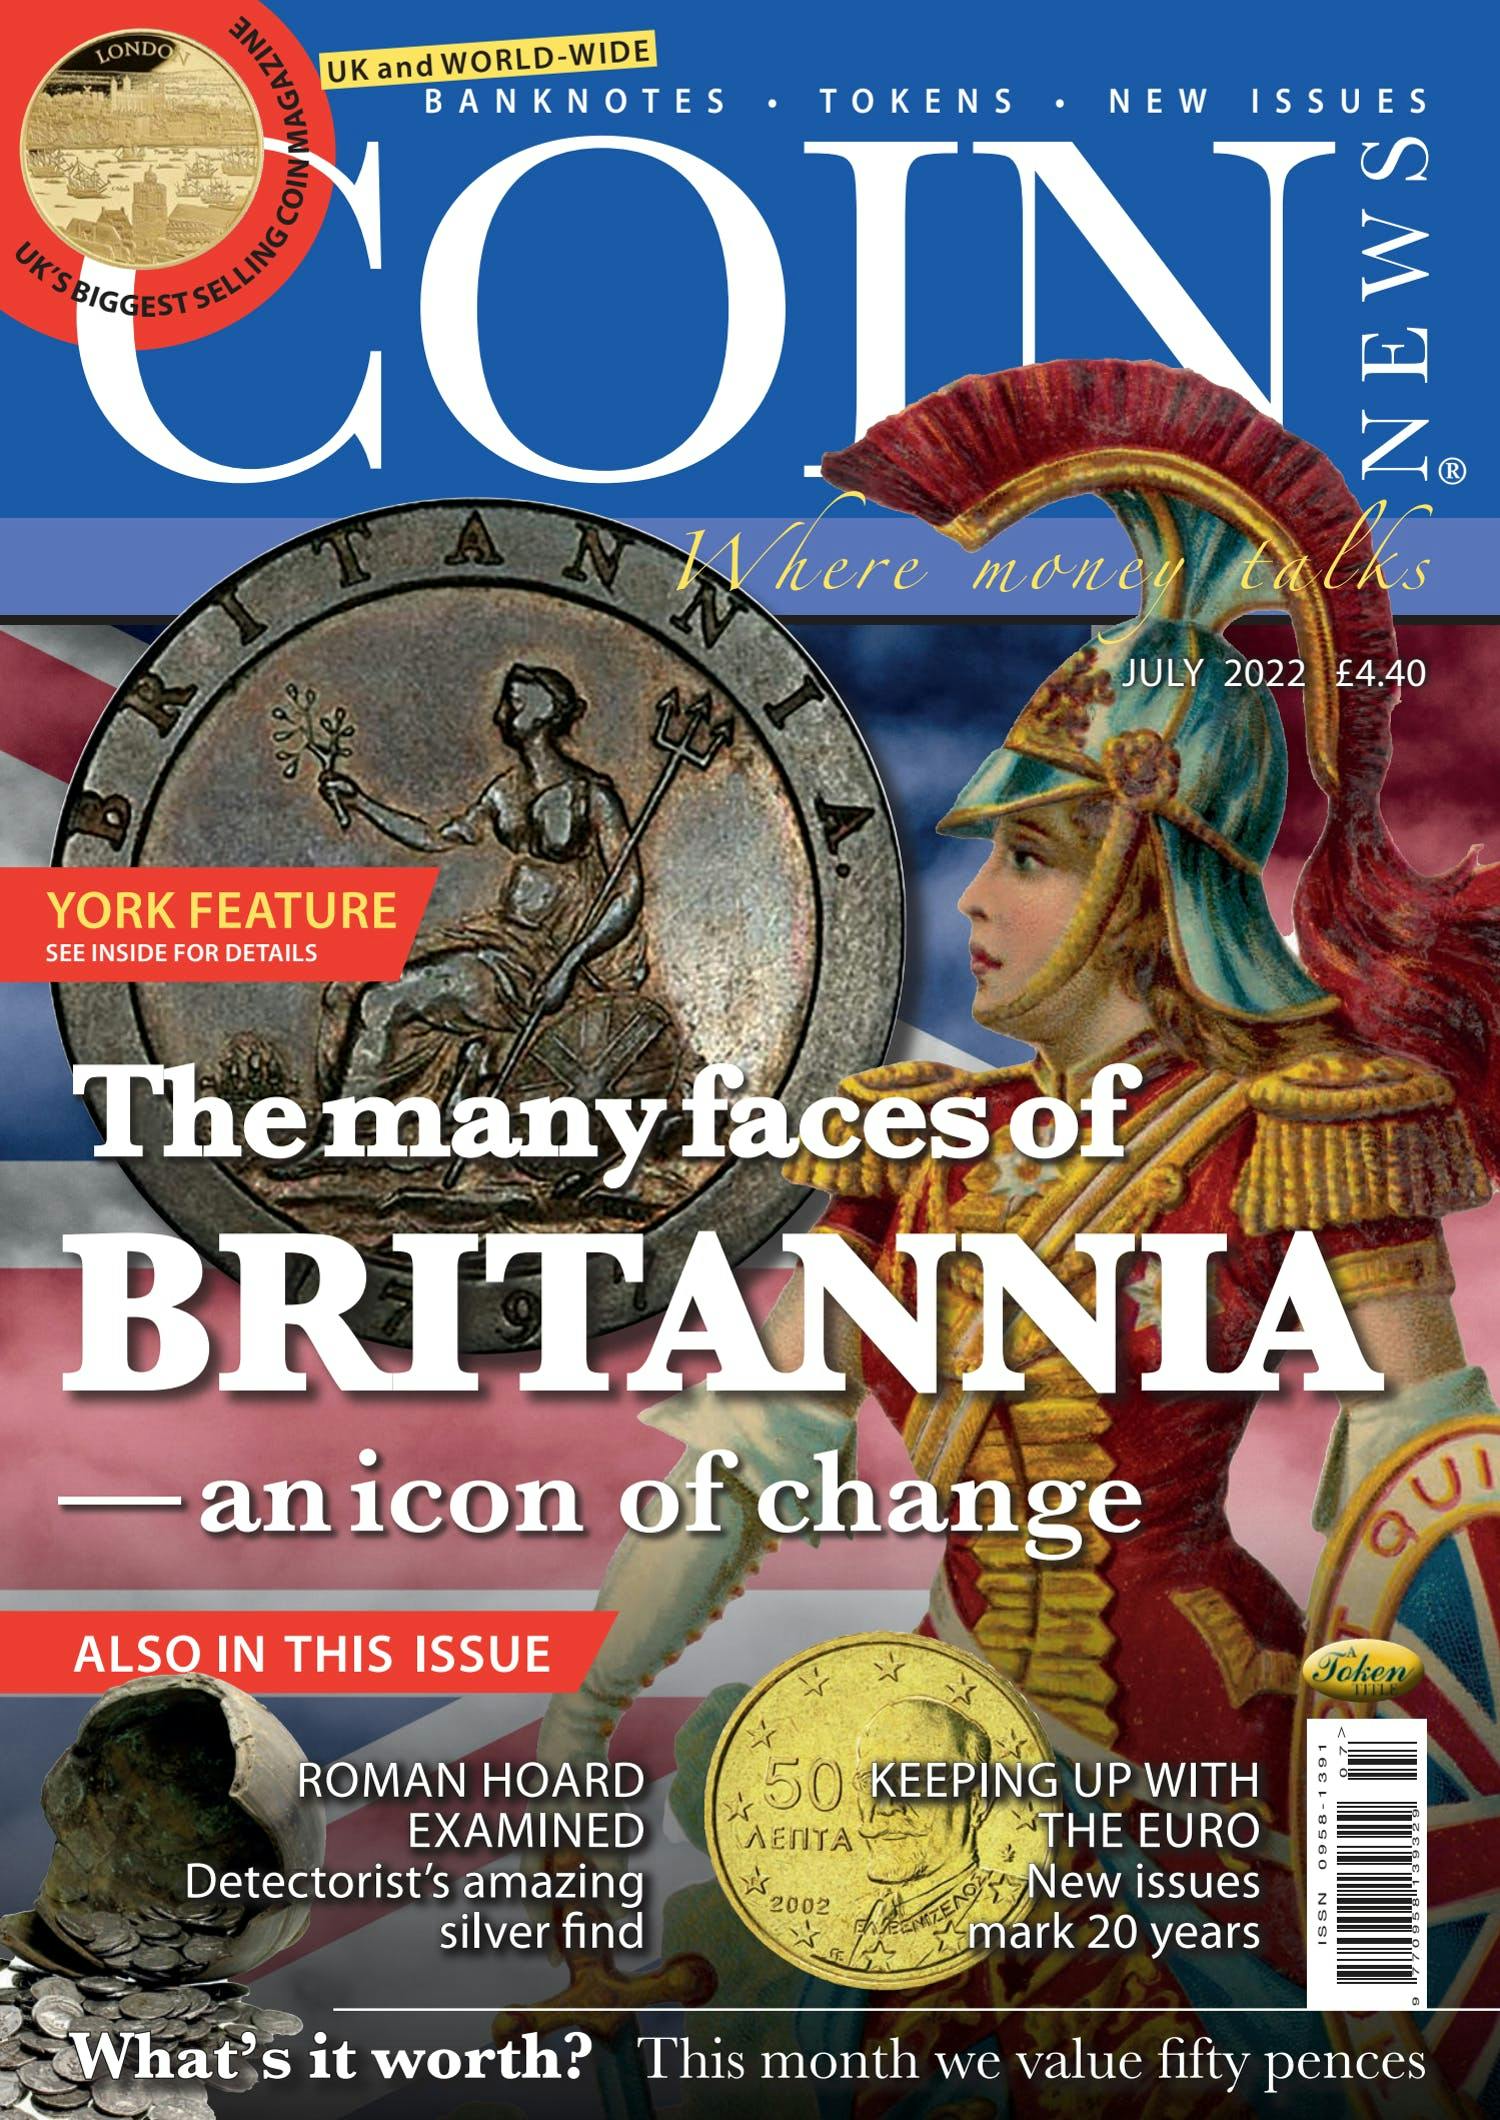 The front cover of Coin News, July 2022 - Volume 59, Number 7